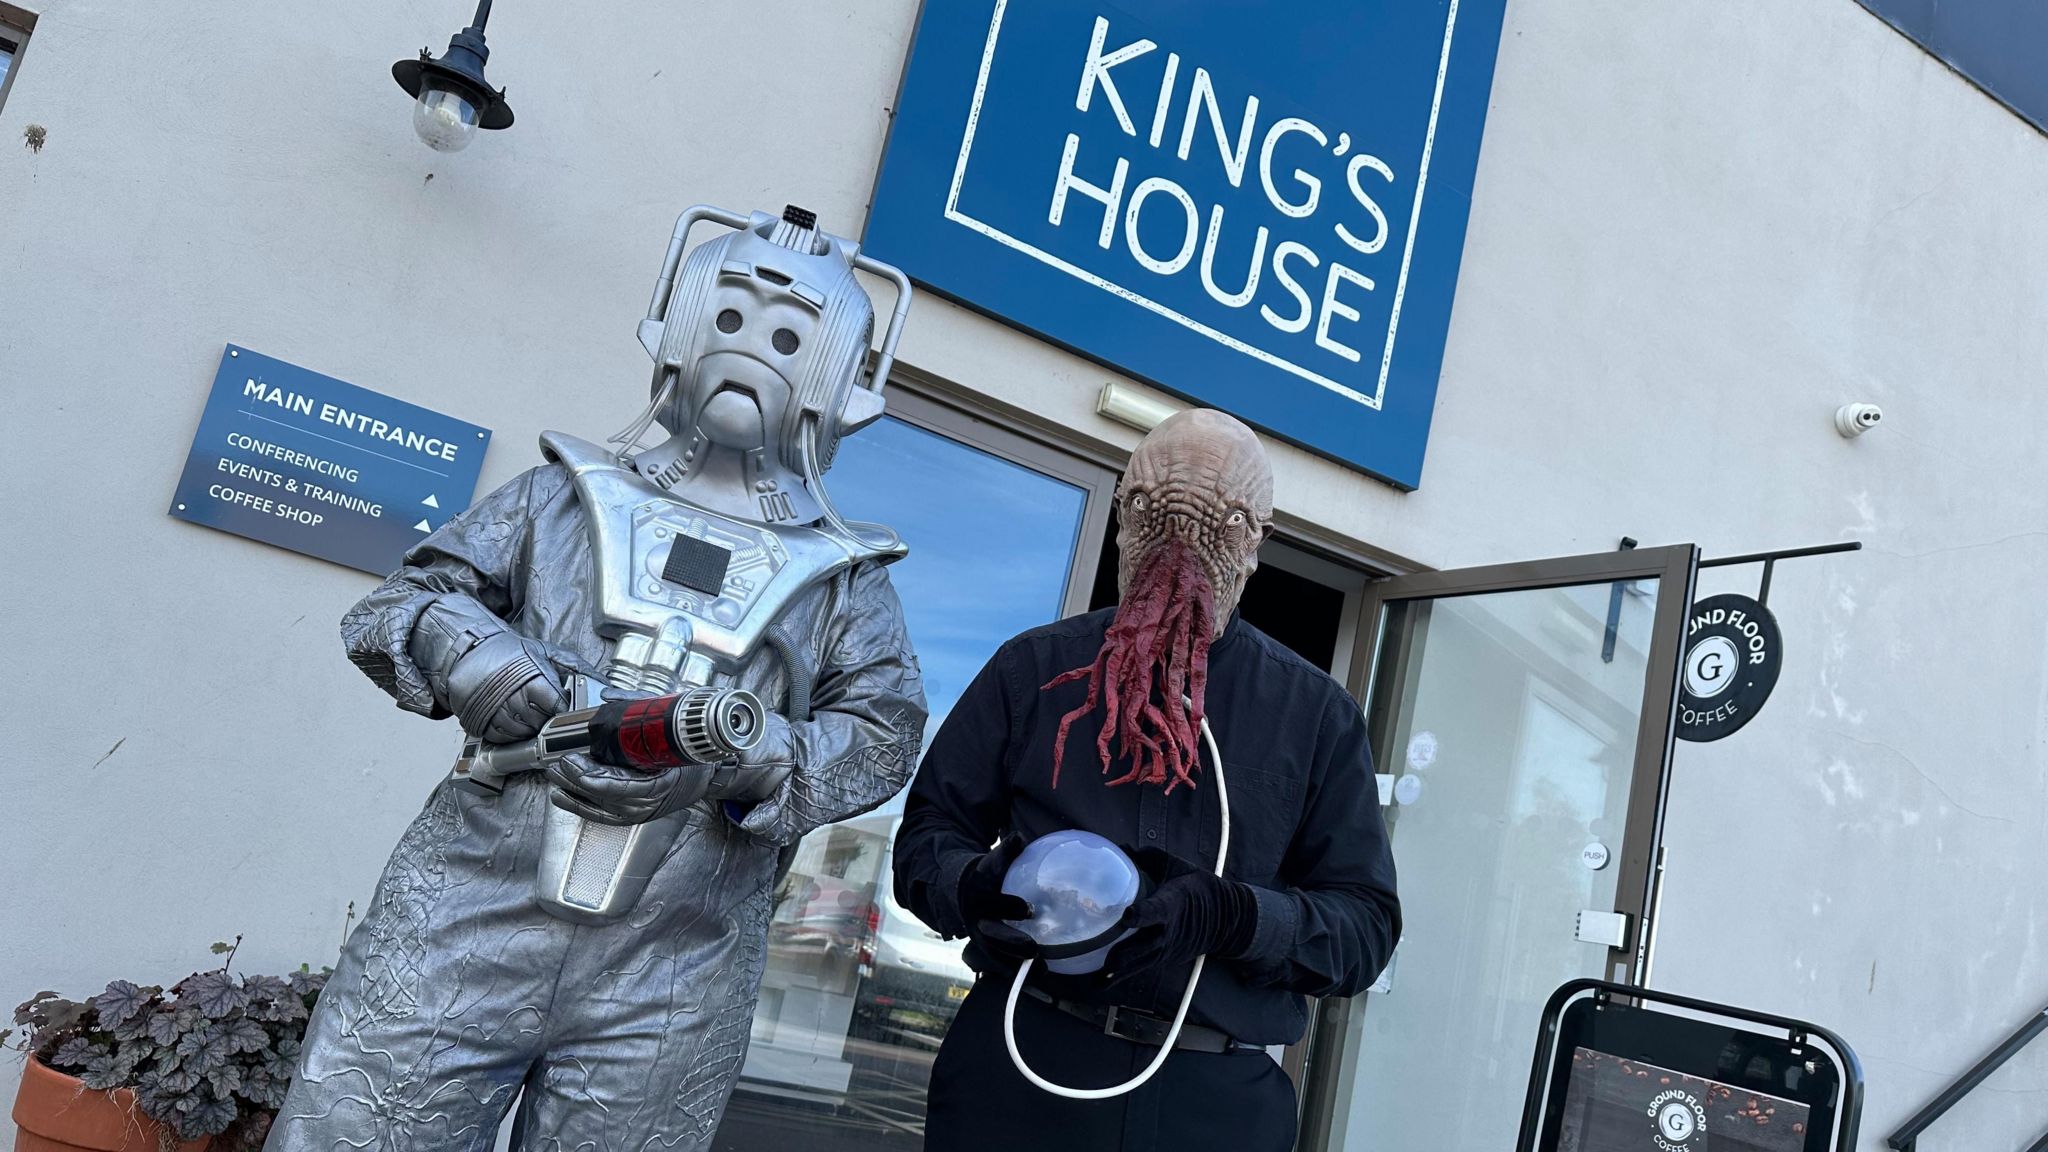 Fan dressed as a Cyberman and Ood outside King's House in bedford